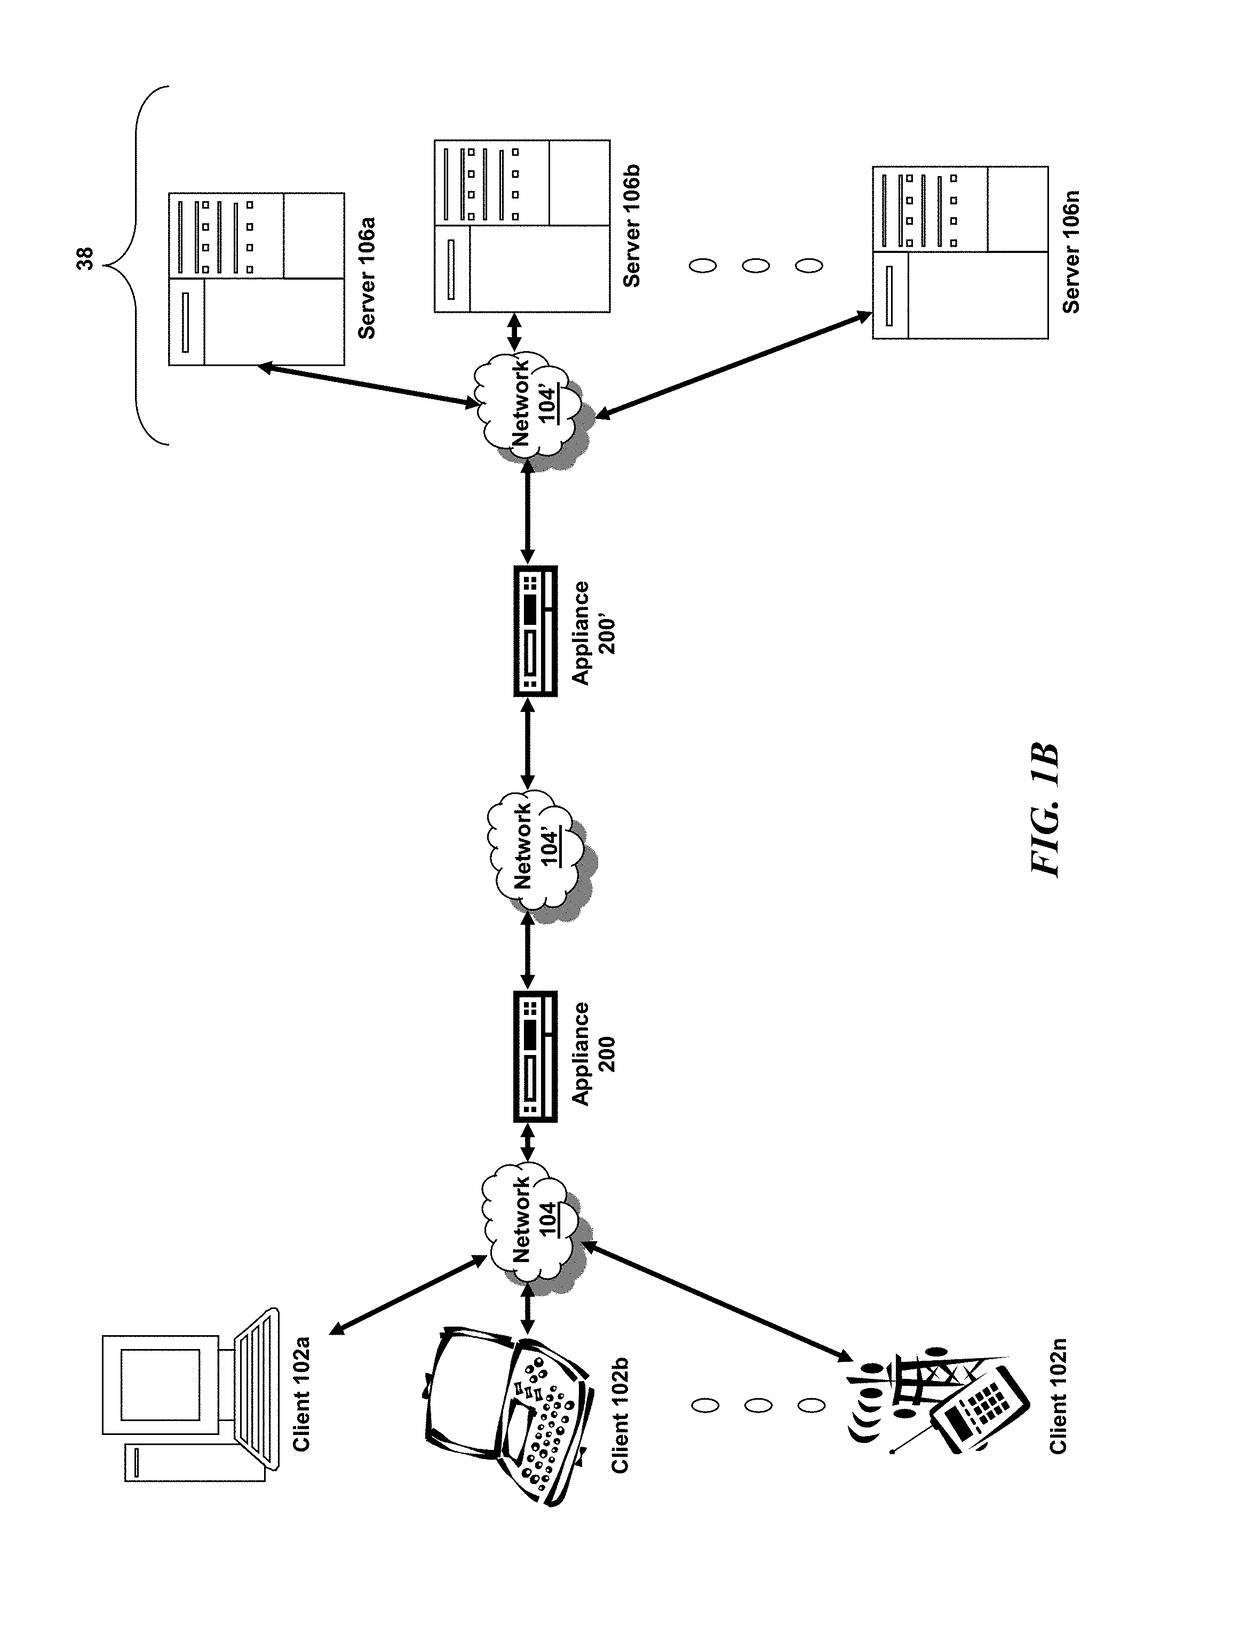 Systems and methods for securely and transparently proxying  saas applications through a cloud-hosted or on-premise network gateway for enhanced security and visibility